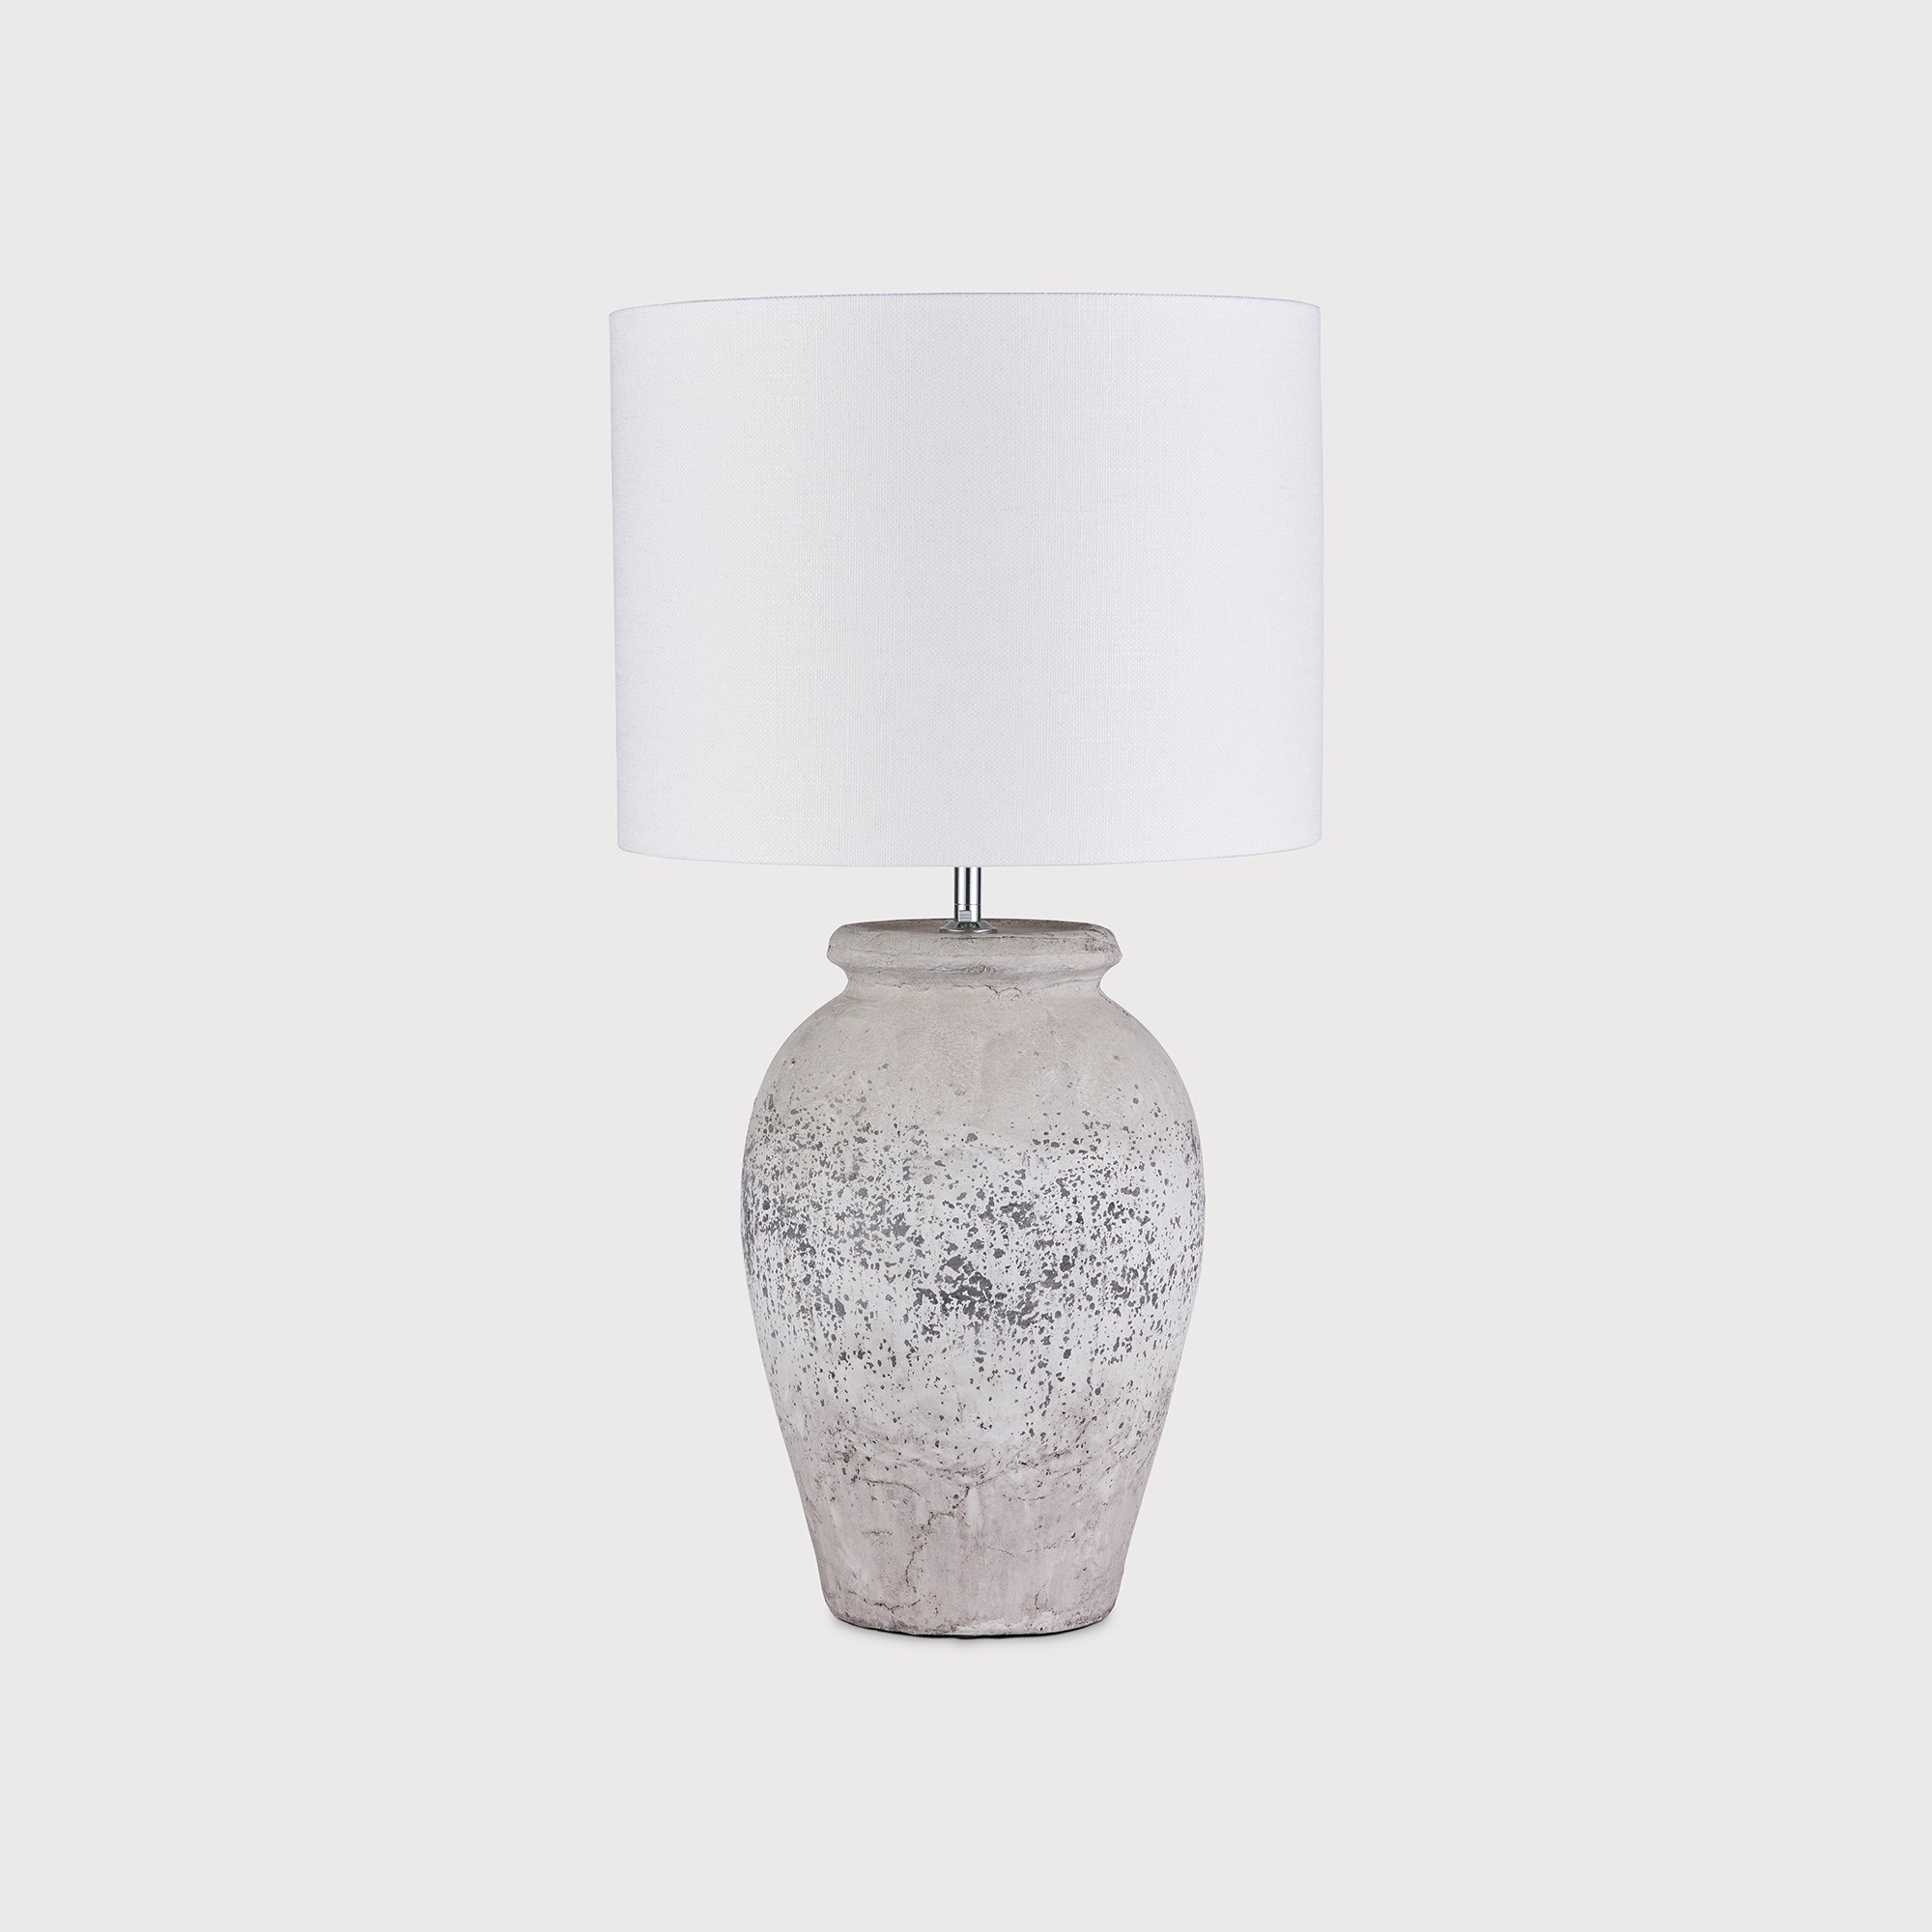 Stone Effect Table Lamp, Neutral Ceramic - Barker & Stonehouse - image 1